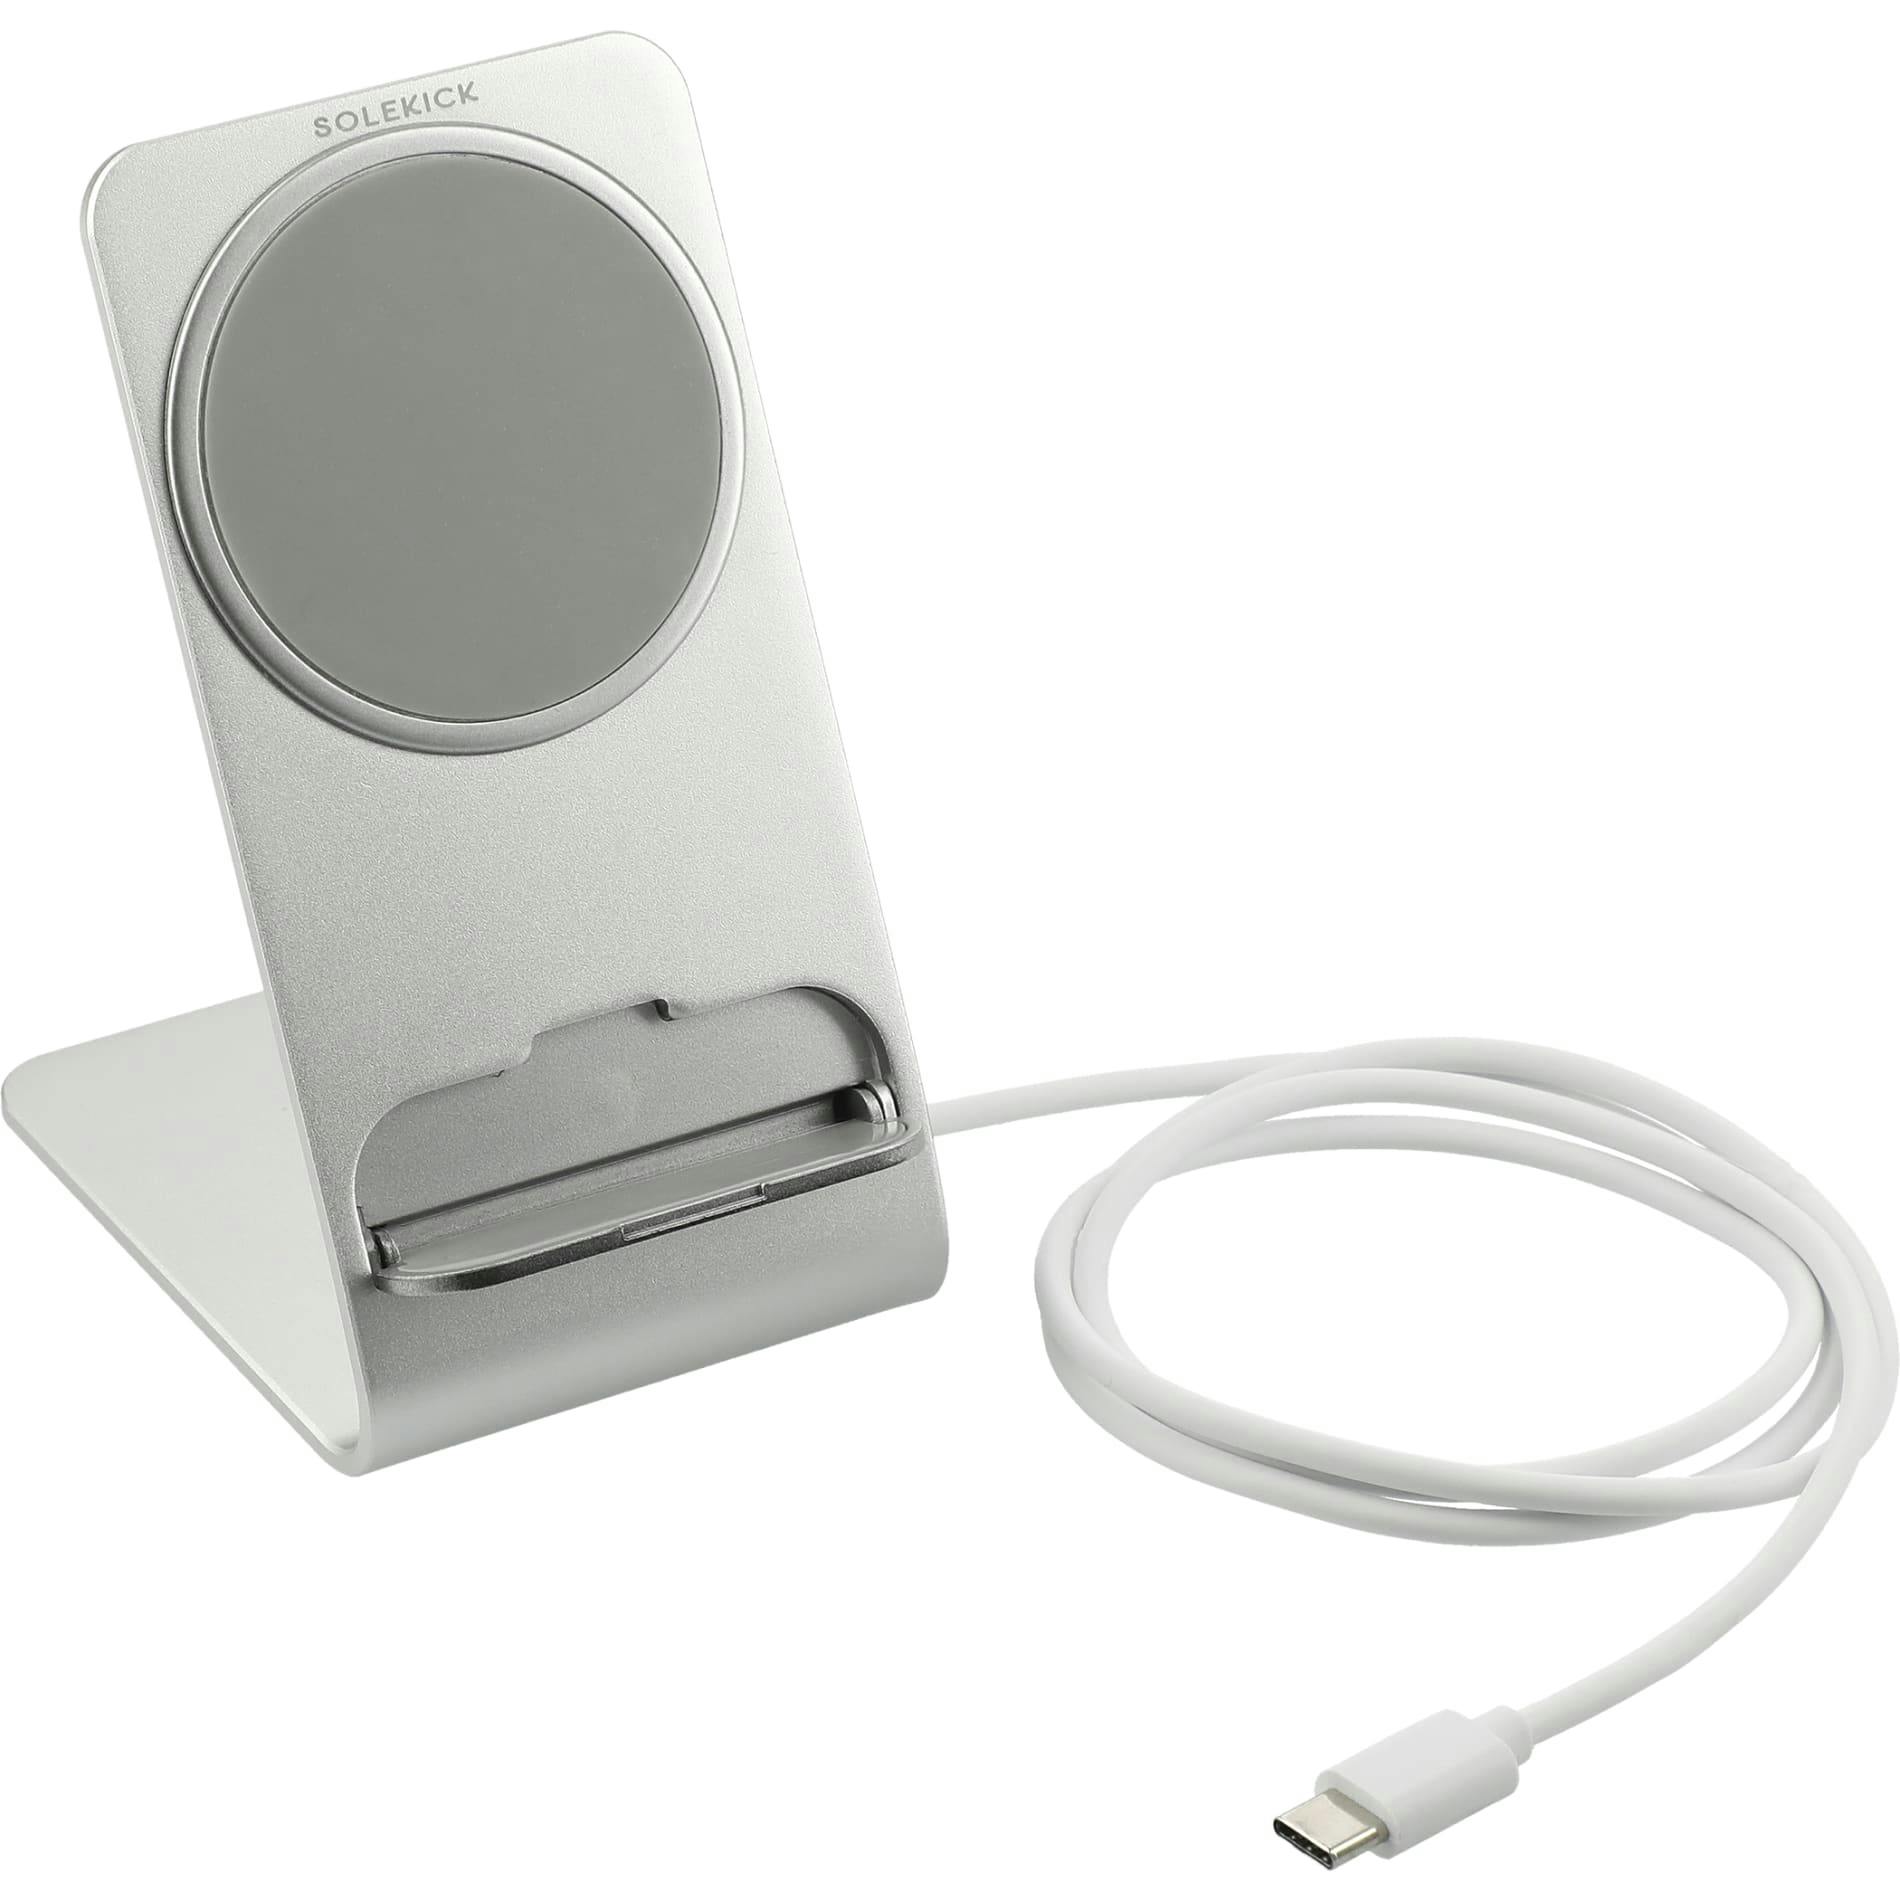 Solekick™ MagClick™ Fast Wireless Charging Stand - additional Image 1